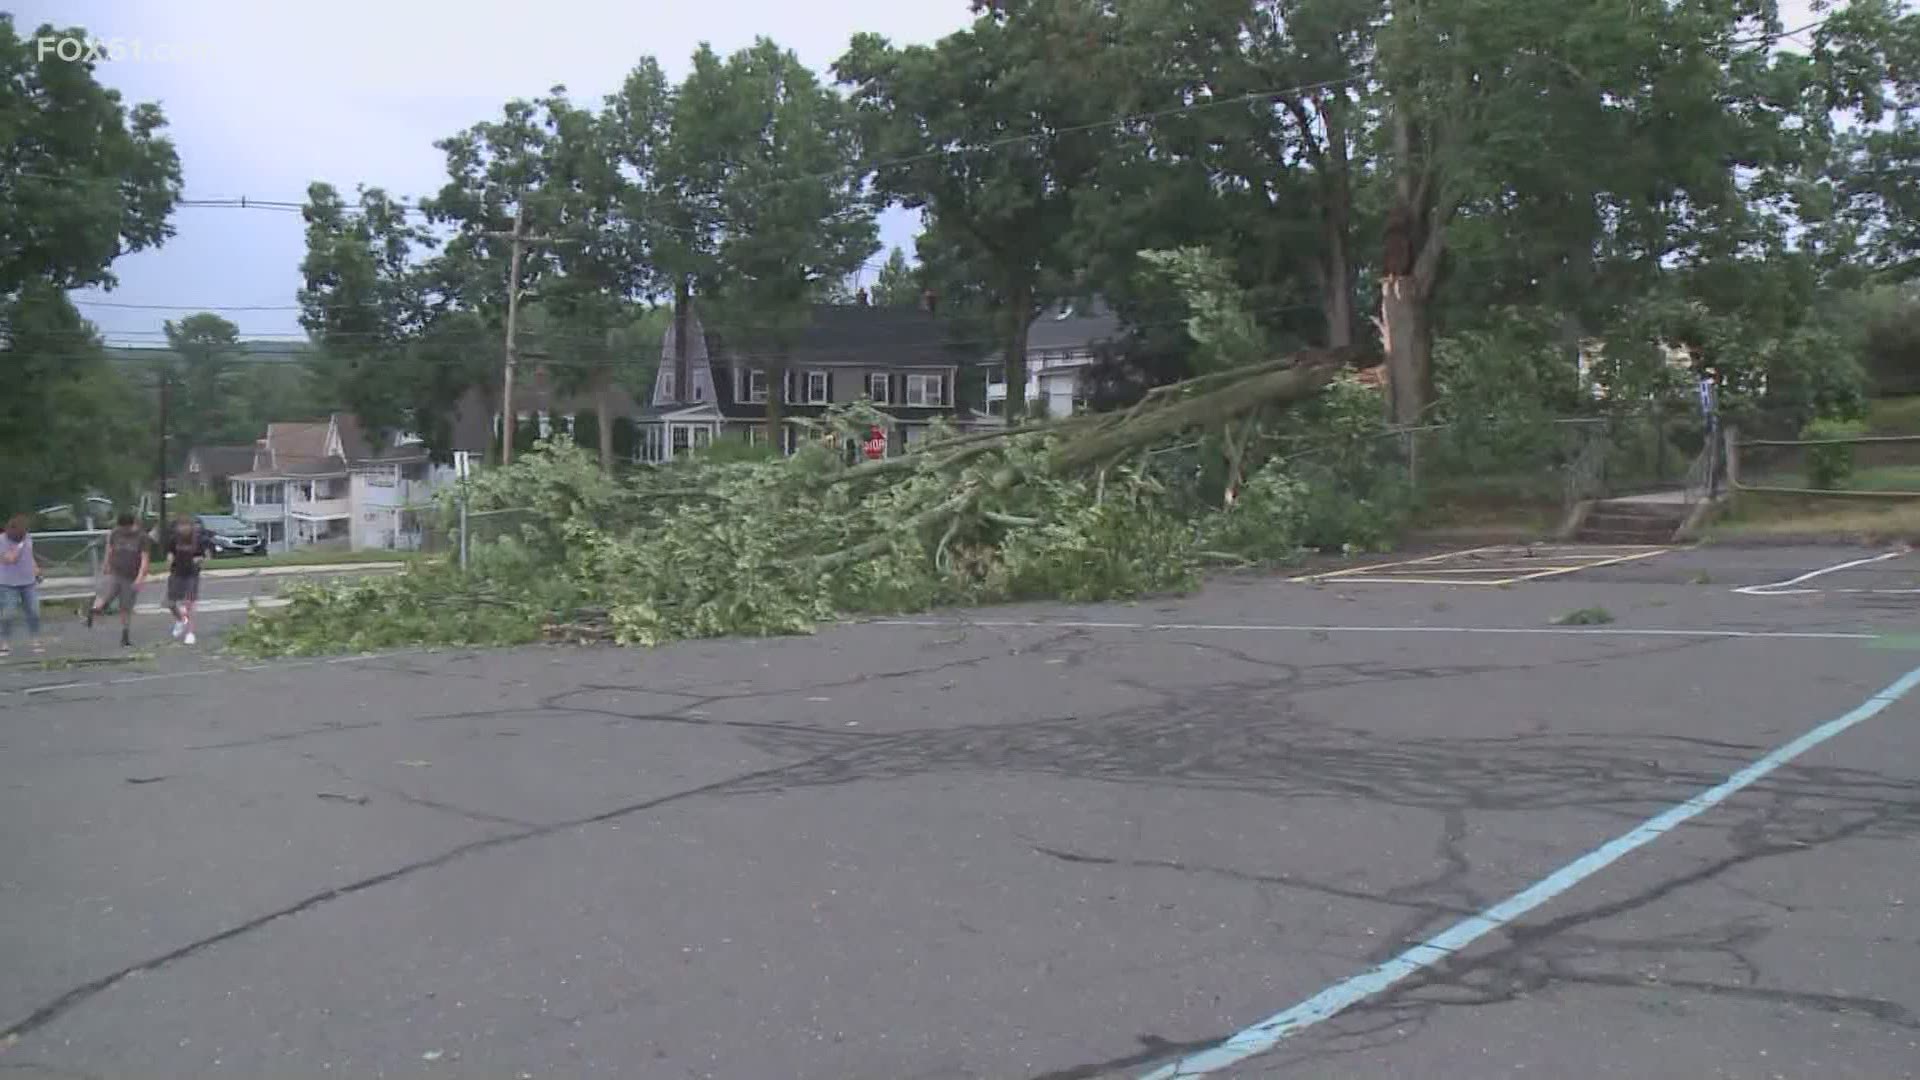 The storms swept across Connecticut on Tuesday evening. Trees and branches were knocked over.